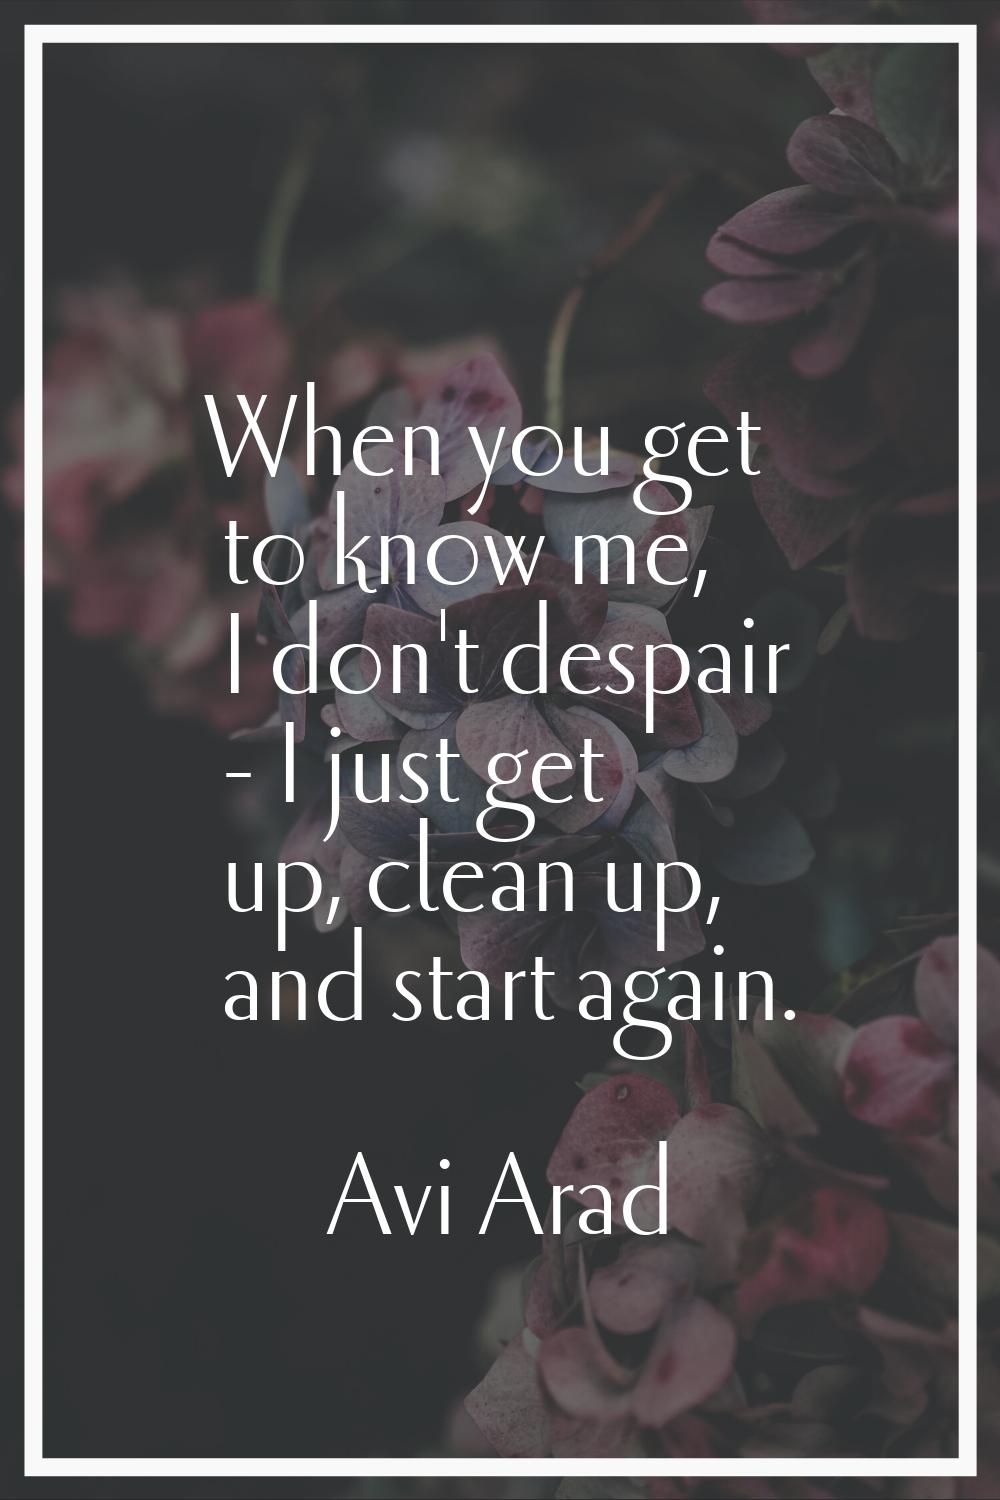 When you get to know me, I don't despair - I just get up, clean up, and start again.